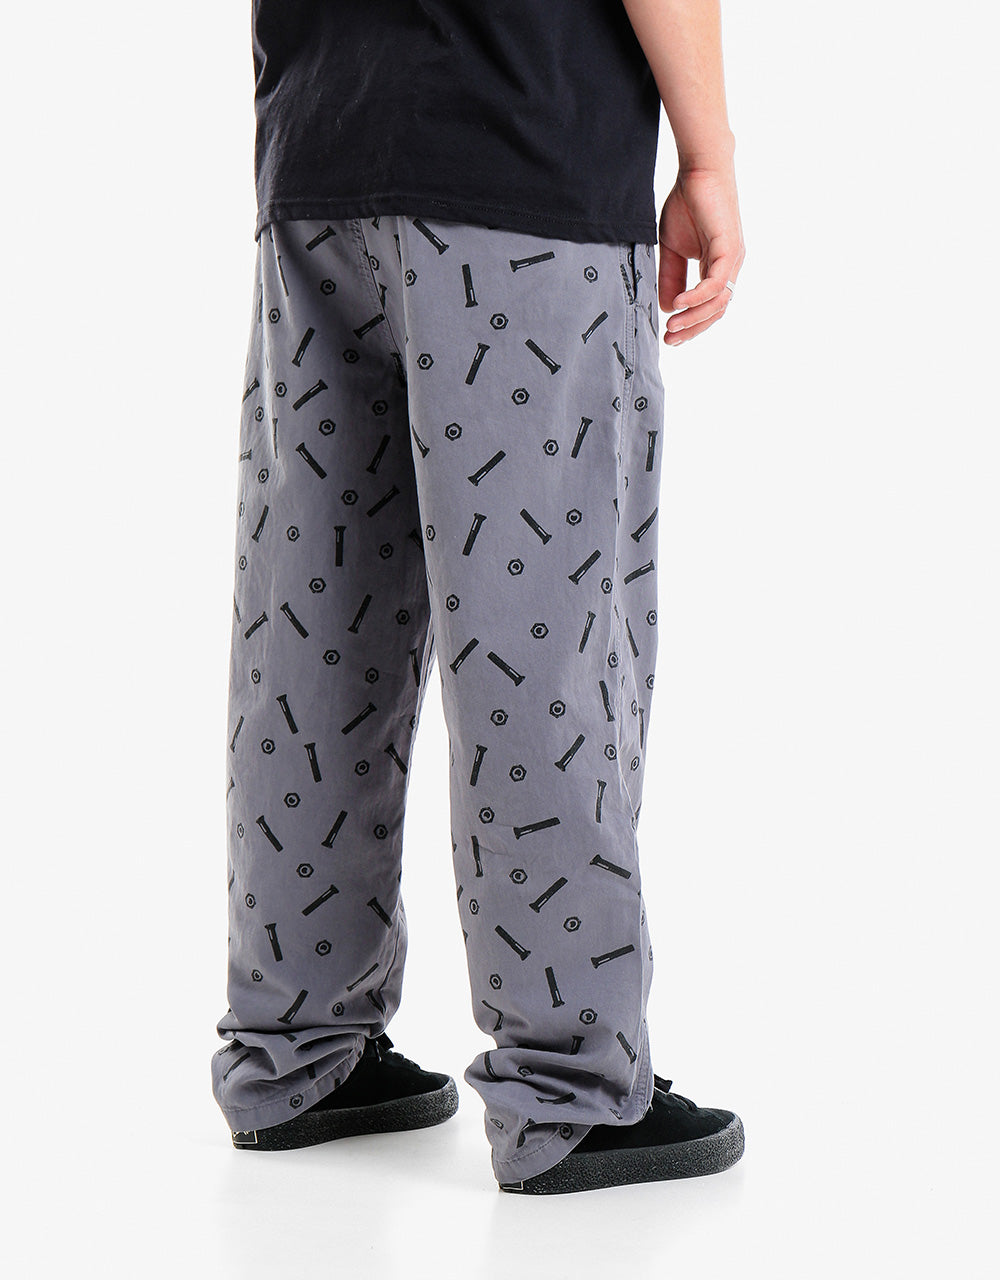 Route One Organic Baggy Pants - Nuts & Bolts